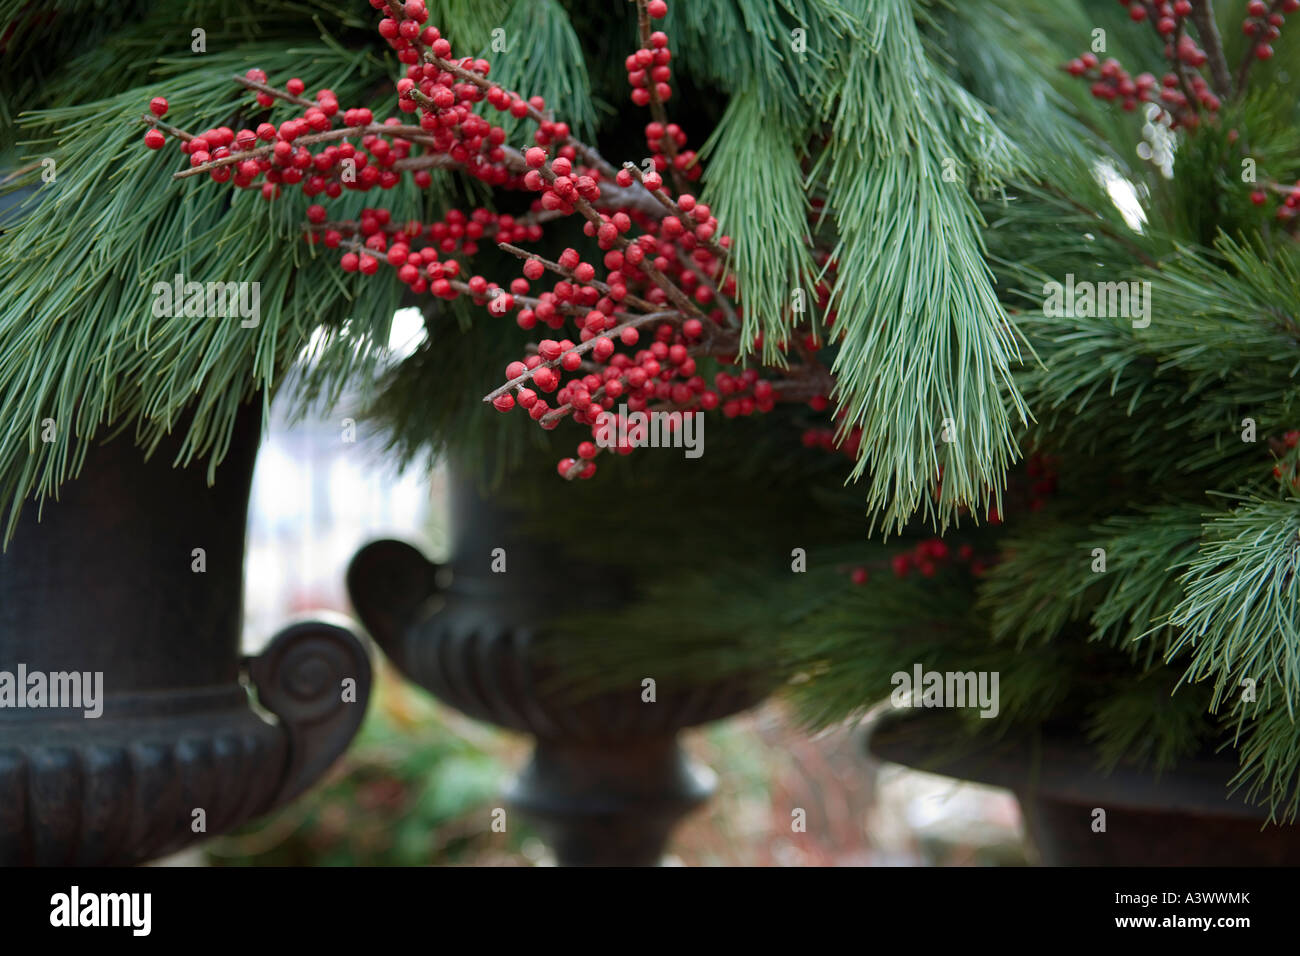 Garden urns filled with pine branches and winter berries Stock Photo